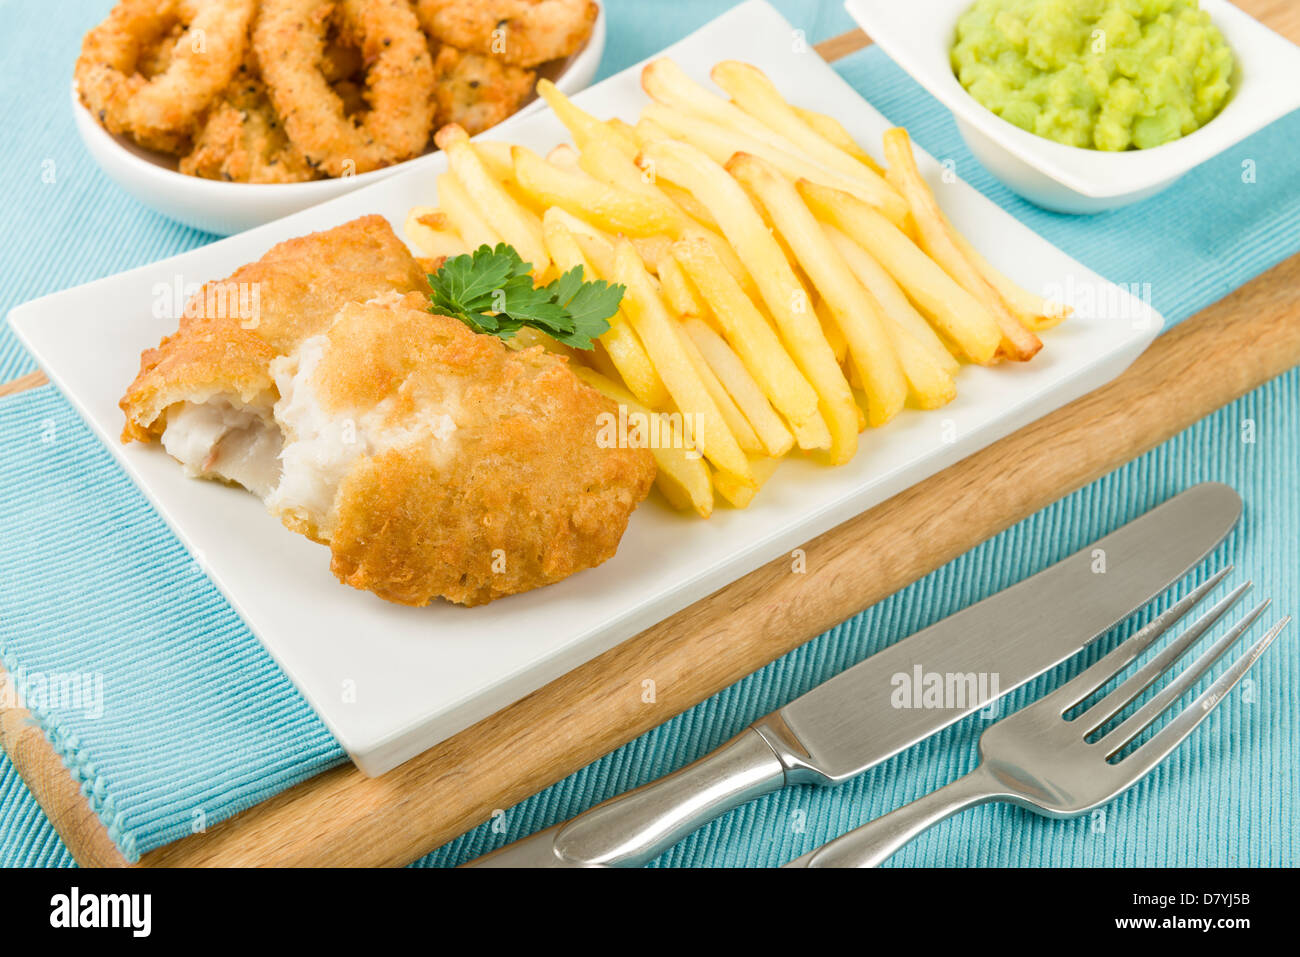 Fish & Chips - Battered cod fillet, chips and mushy peas. Stock Photo